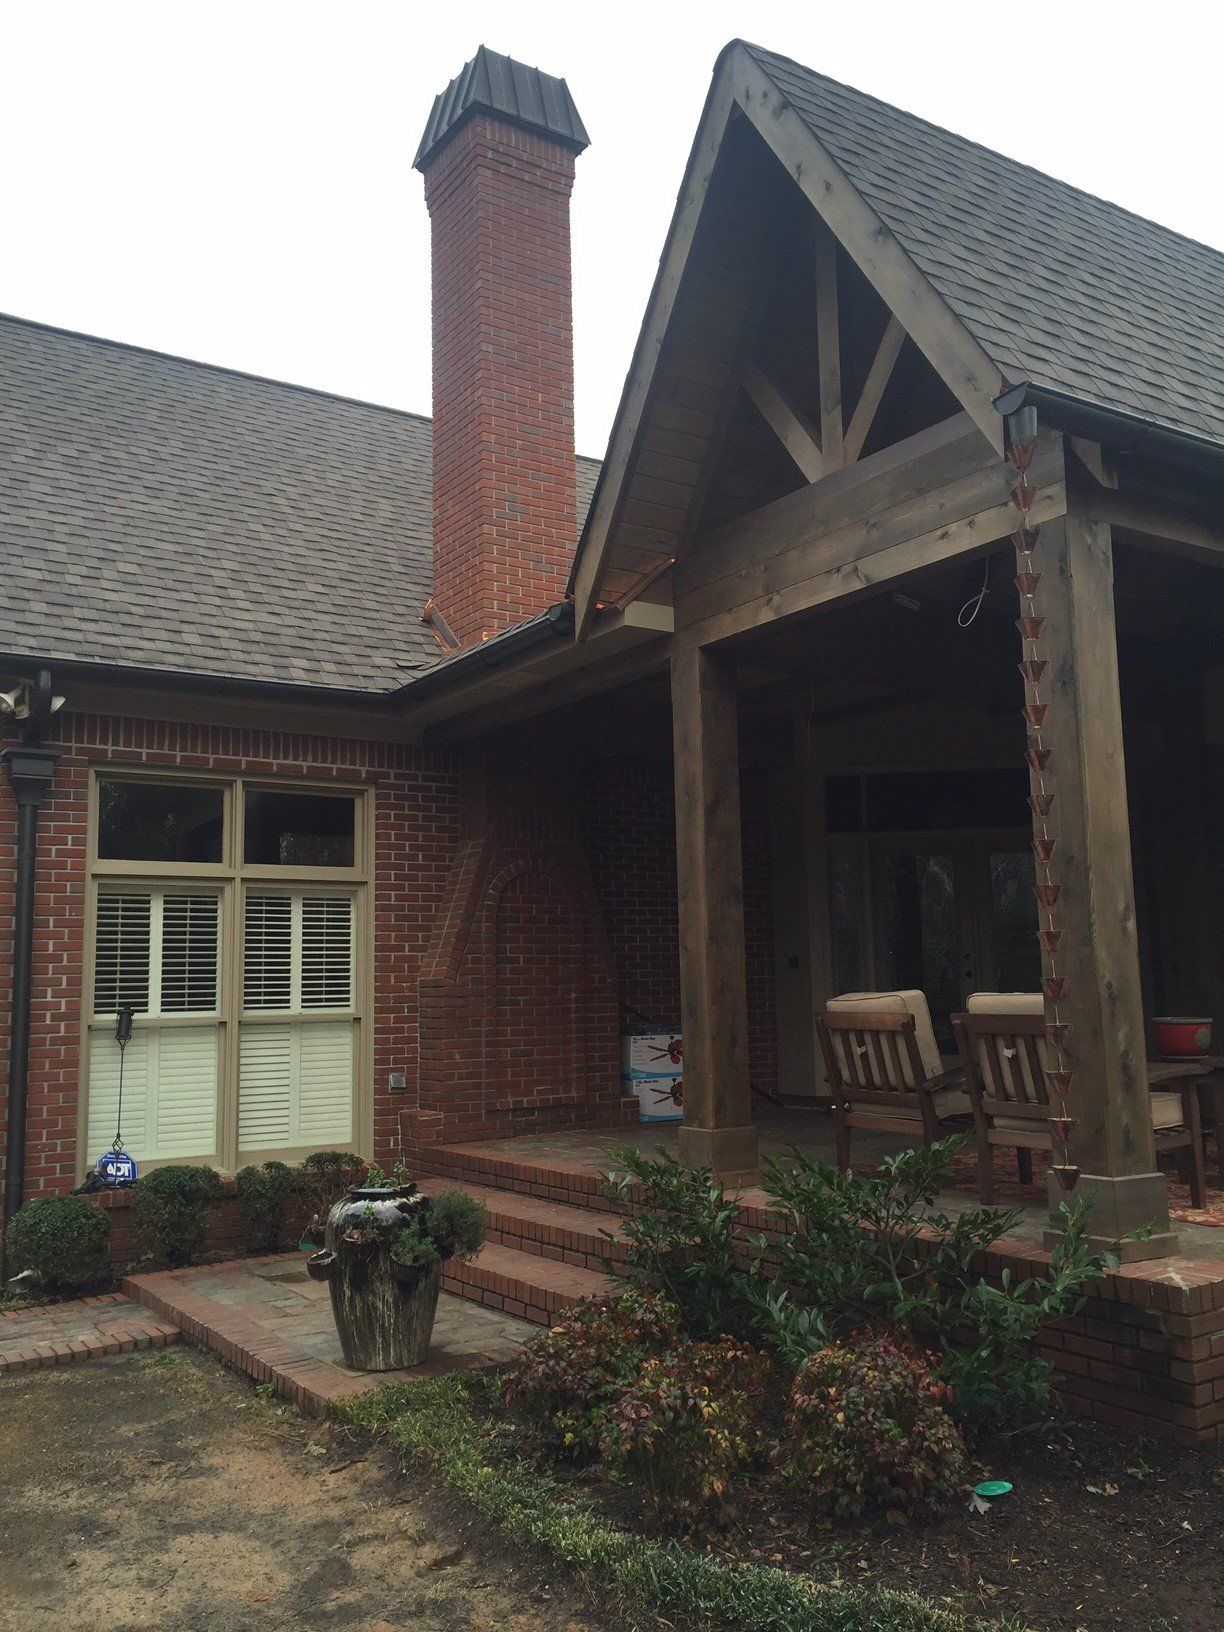 Covered patio - B & B Roofing in Decatur, AL